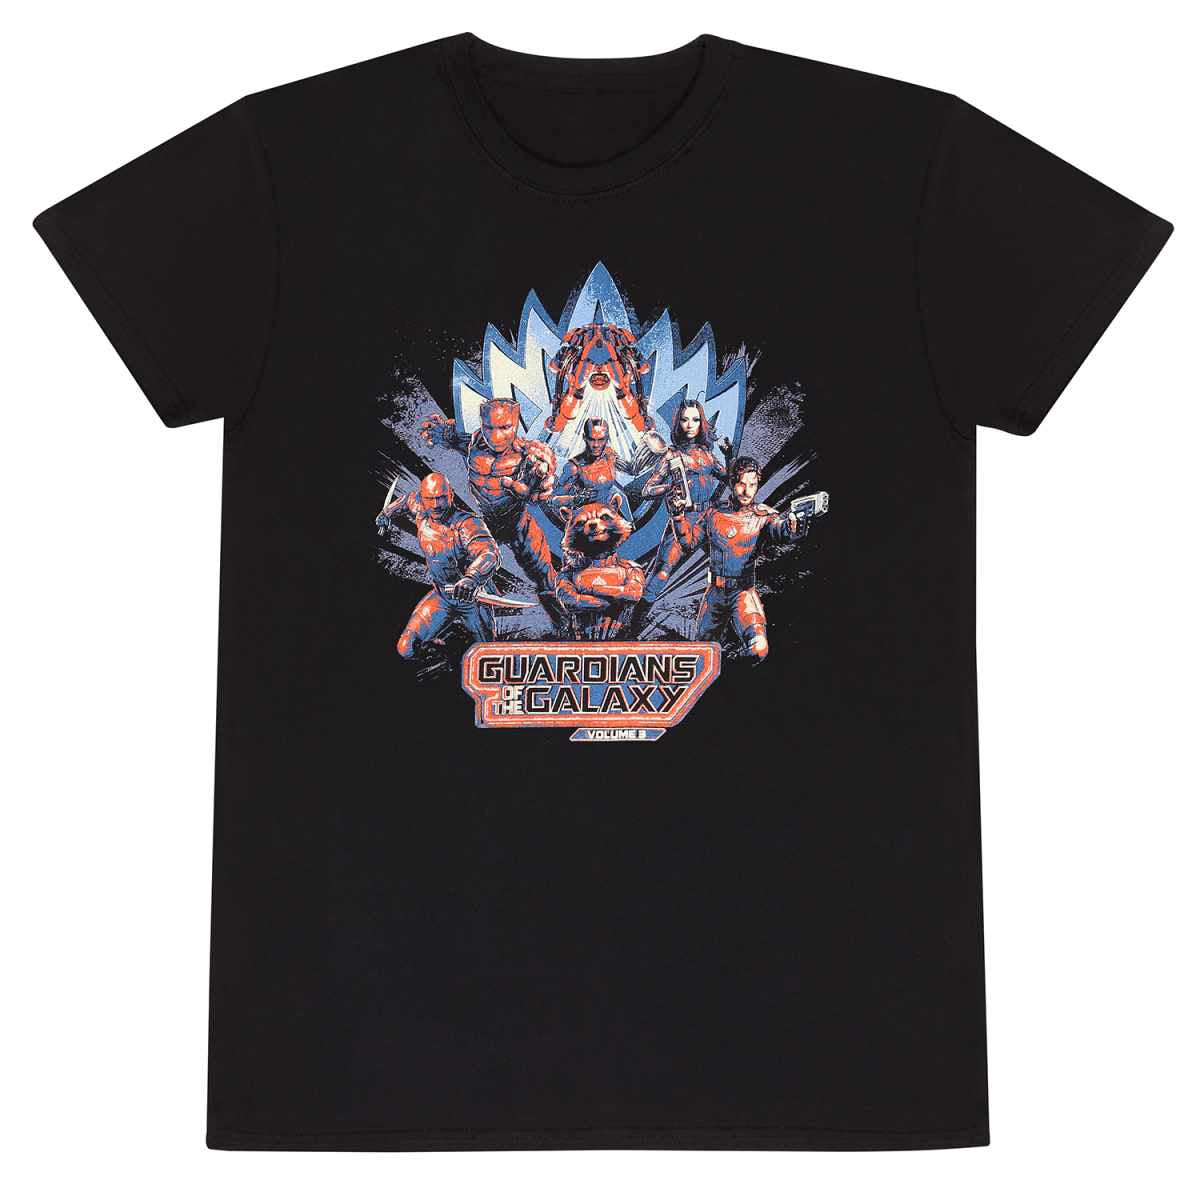 Guardians of the Galaxy Vol. 3 promotional t-shirt with Guardians vest design